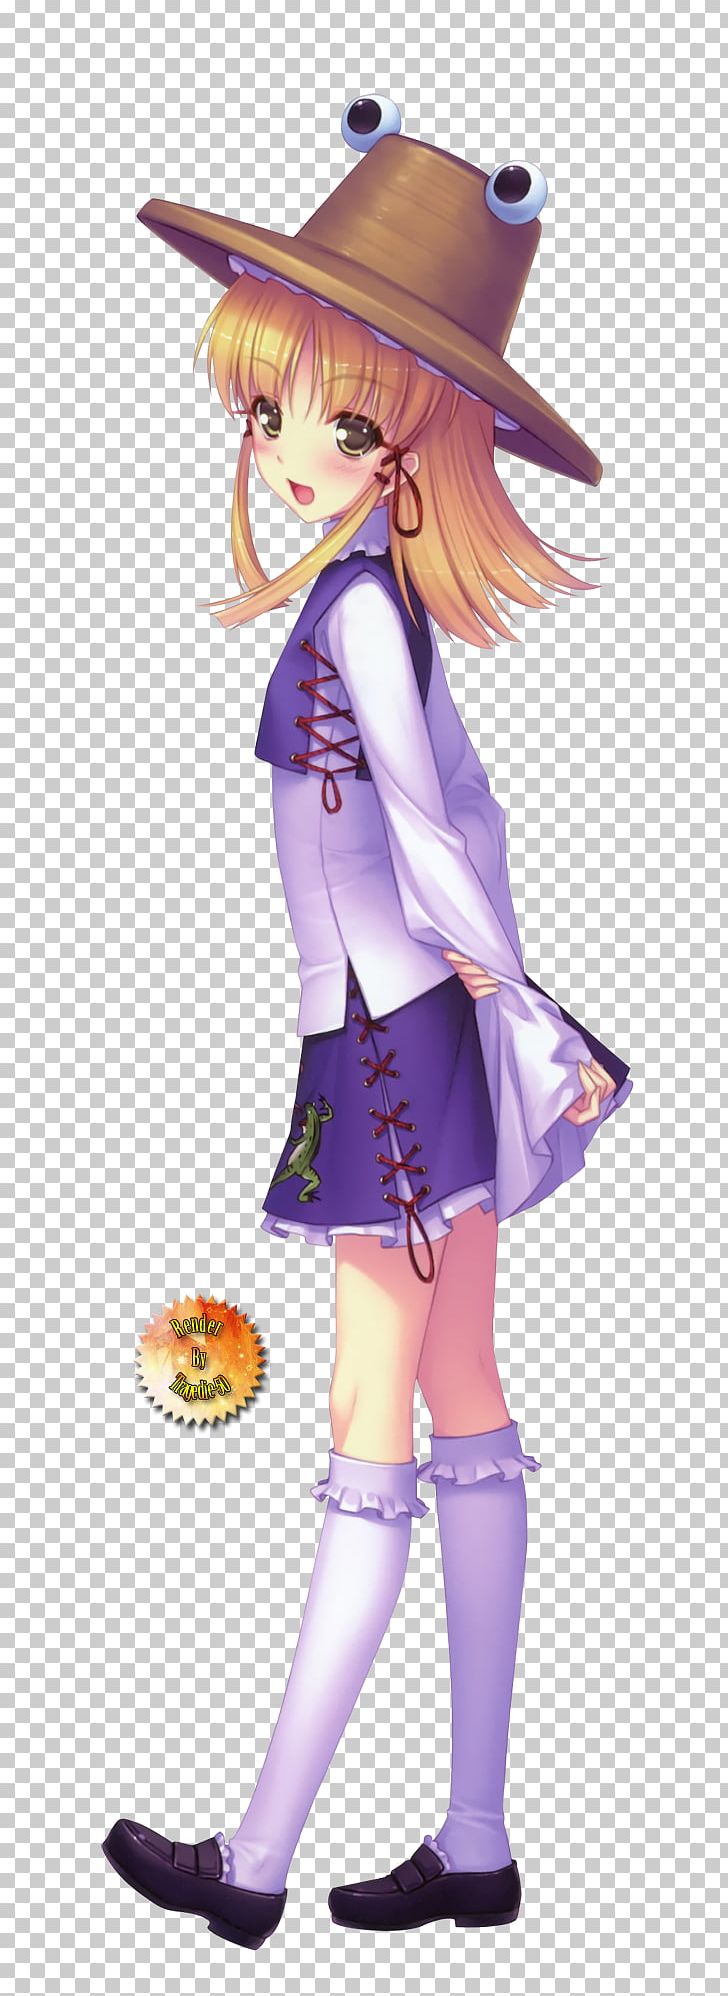 Touhou Project Anime Manga Team Shanghai Alice PNG, Clipart, Animaatio, Anime, Art, Brown Hair, Cartoon Free PNG Download